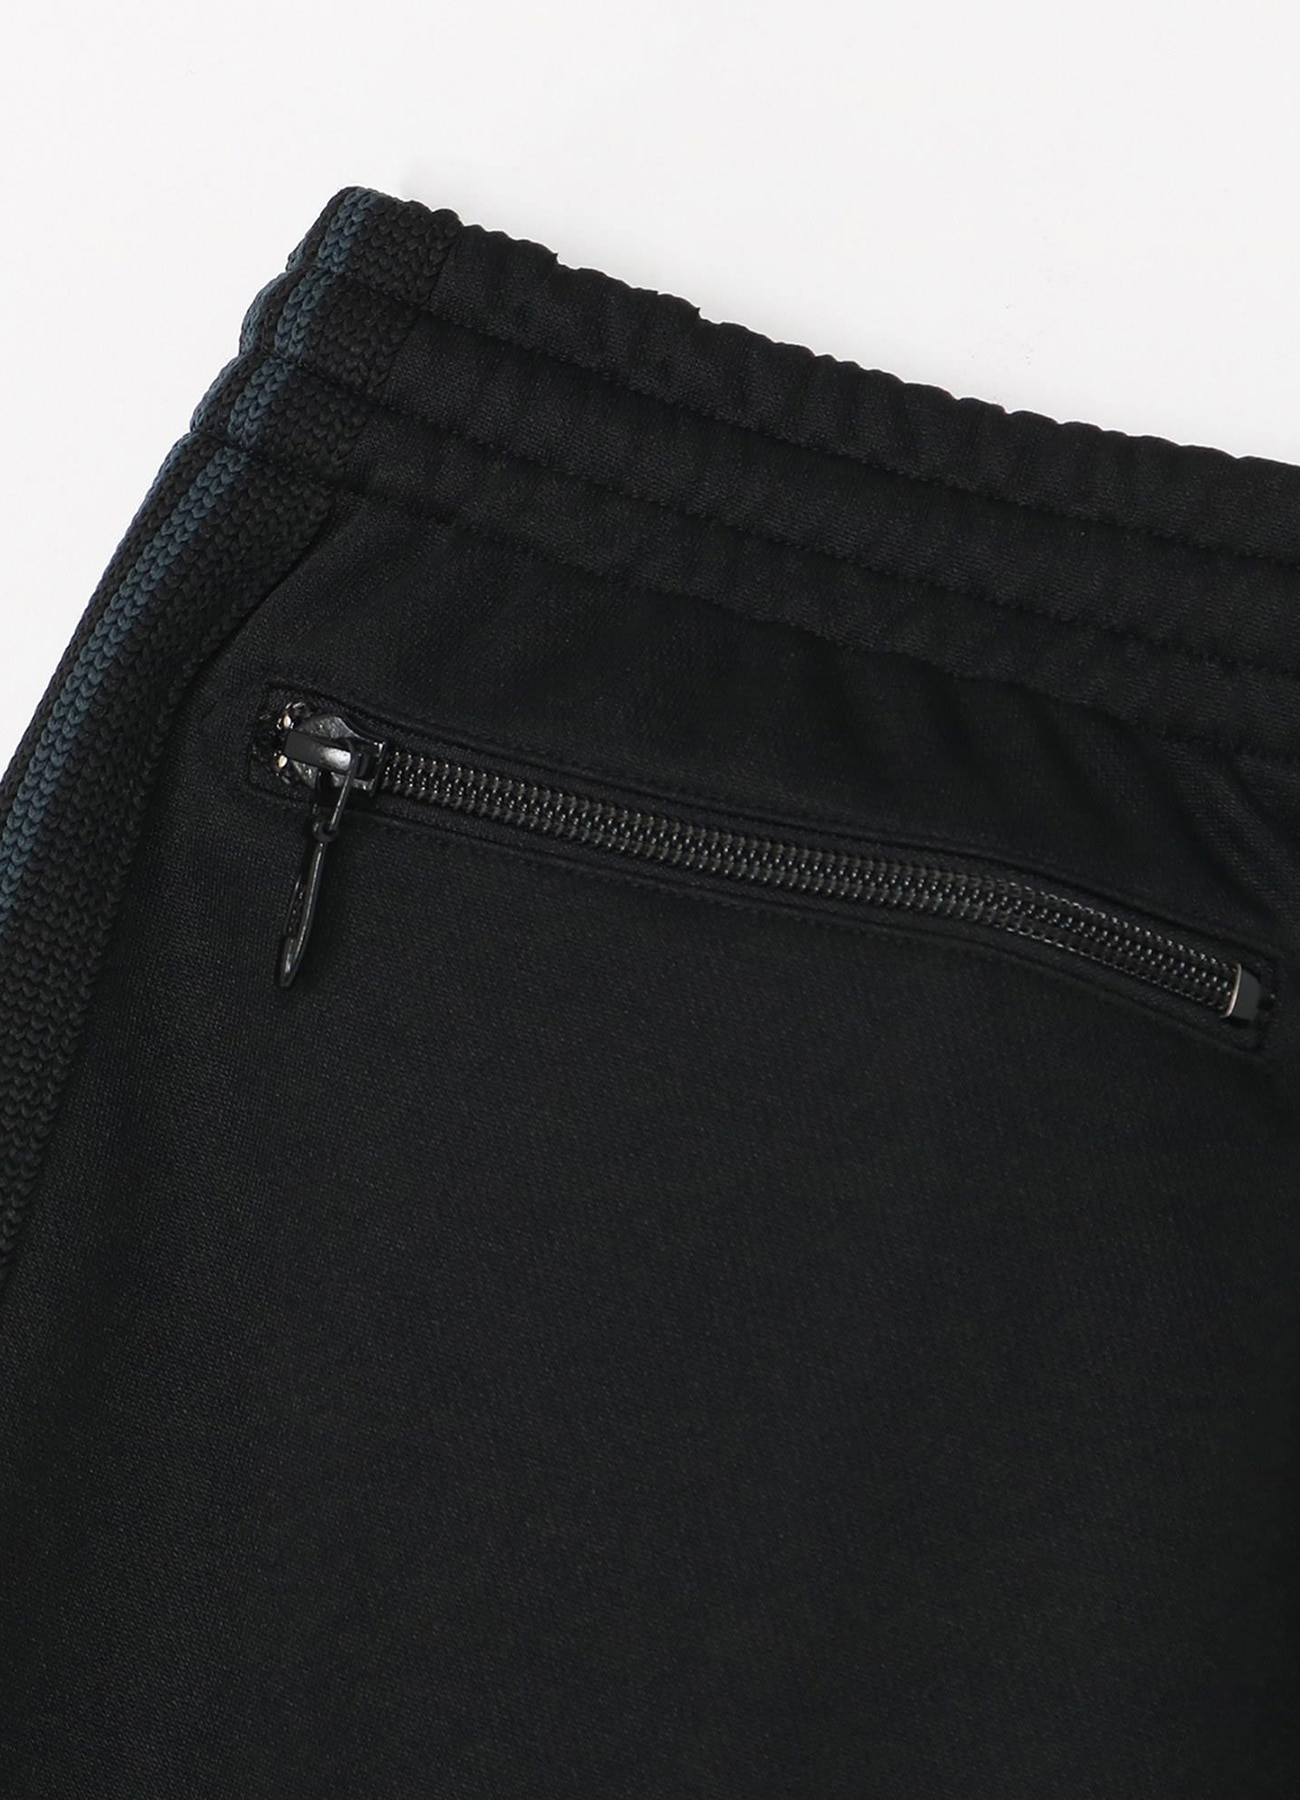 WILDSIDE x NEEDLES Track Pant (XS CHARCOALxBLACK): NEPENTHES